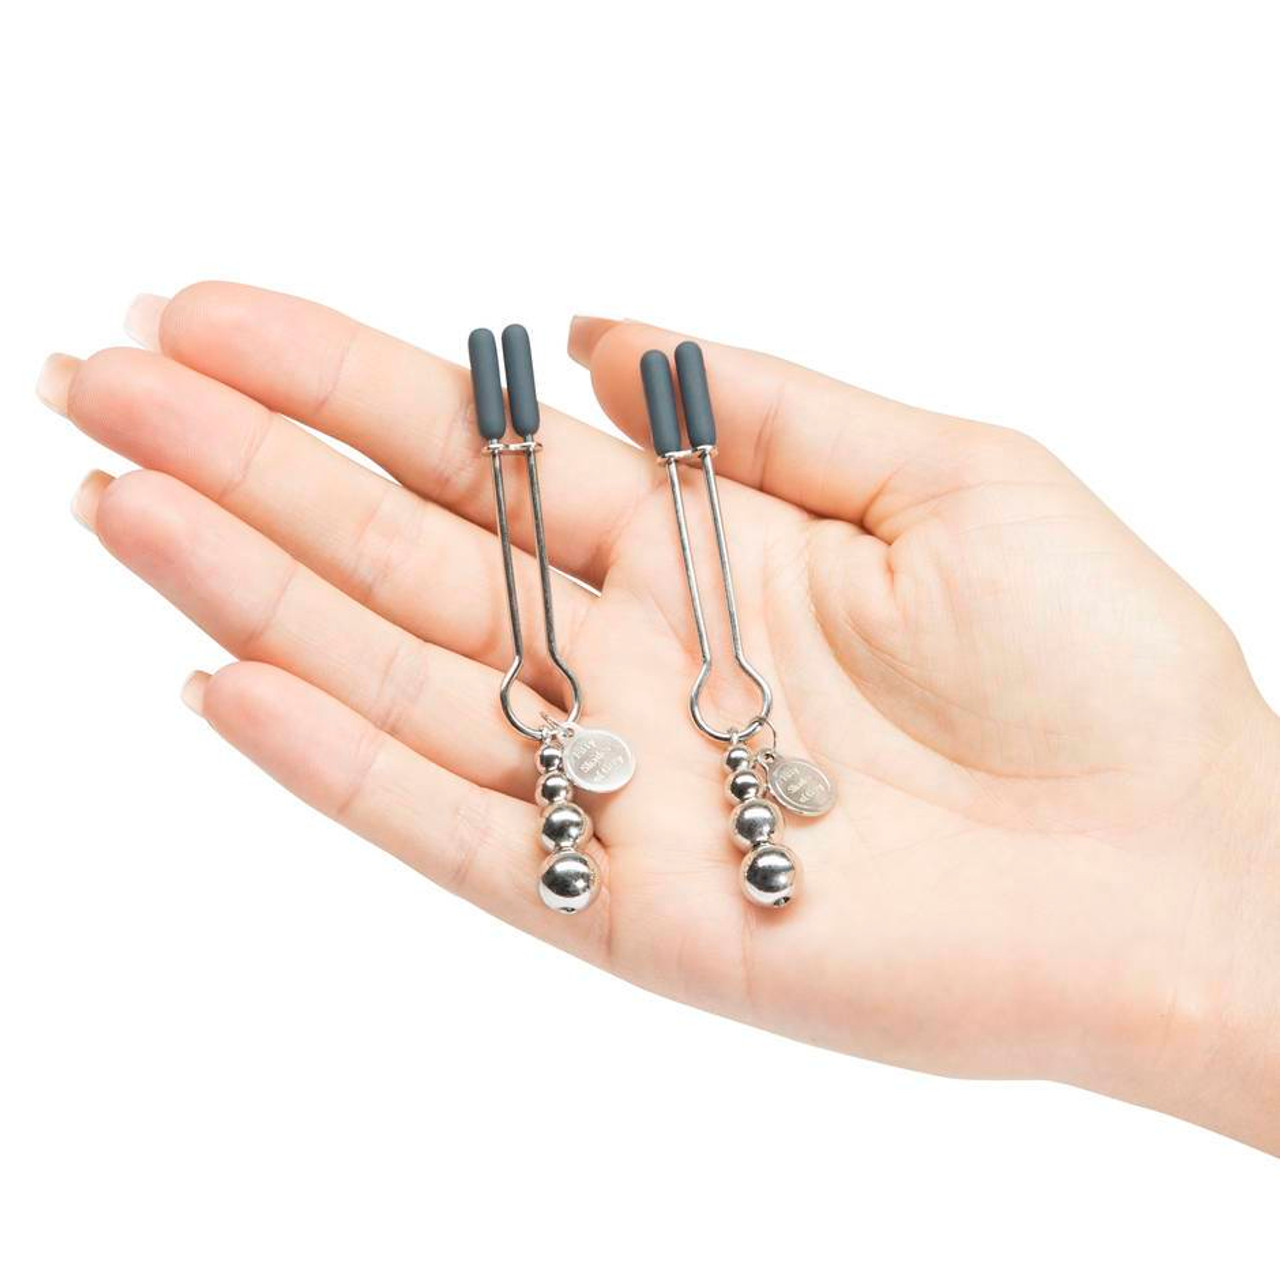 https://cdn11.bigcommerce.com/s-rph88/images/stencil/1280x1280/products/5352/190590/fifty-shades-of-grey-the-pinch-adjustable-tweezer-style-nipple-clamps_2__22431.1558826882.jpg?c=2